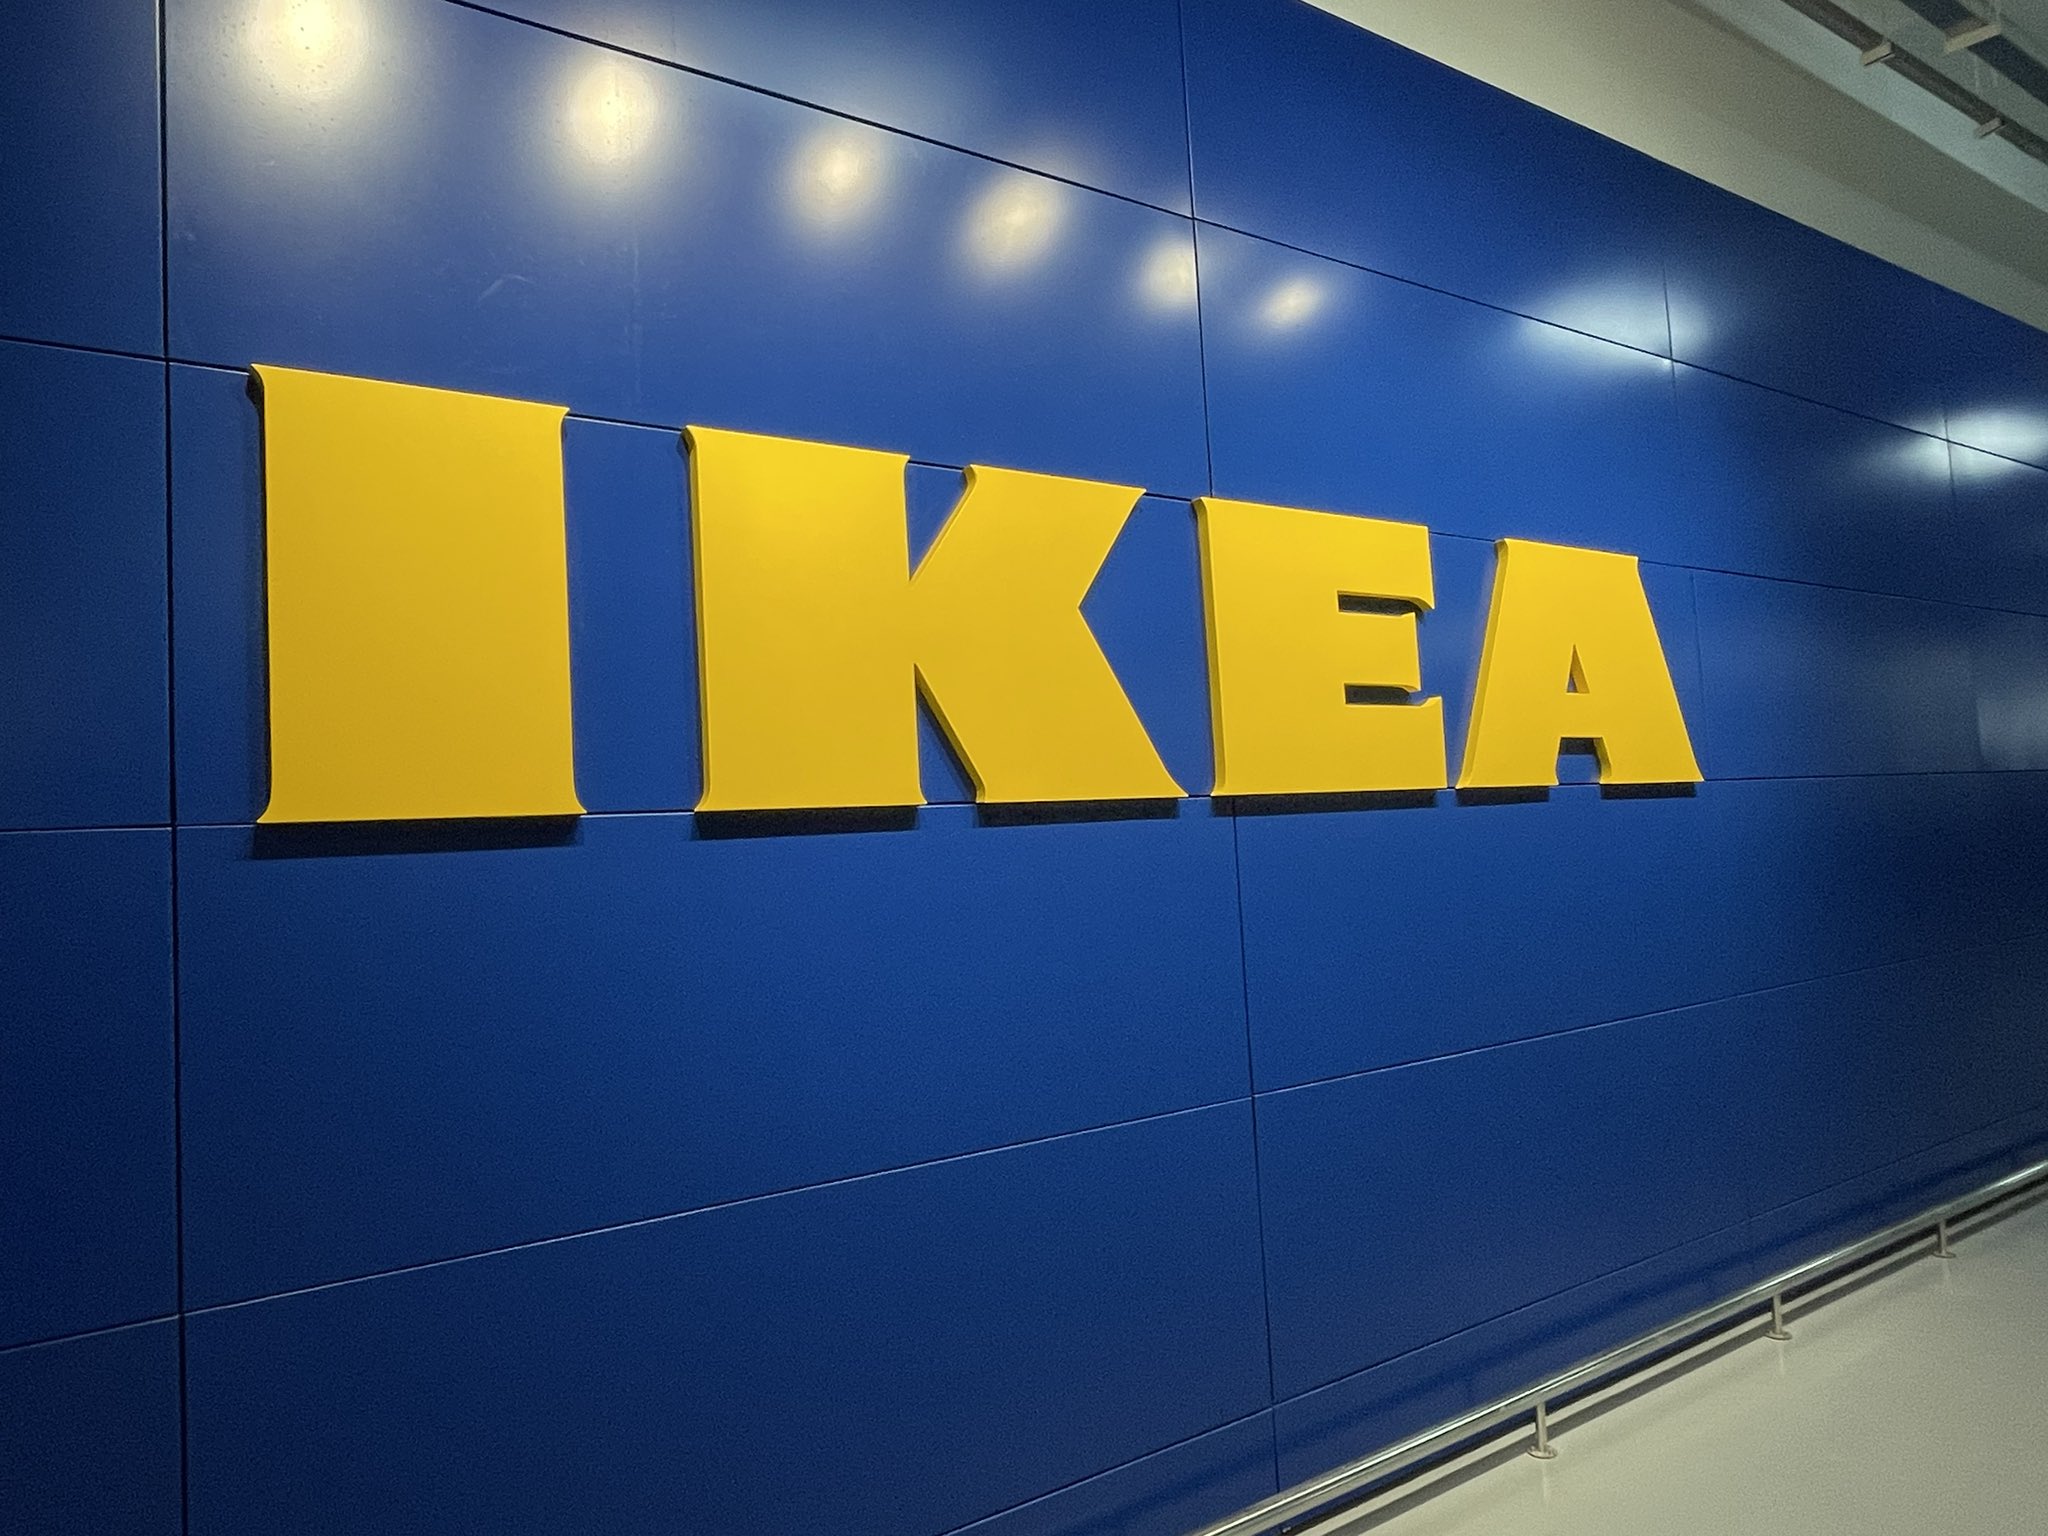 Look World S Largest Ikea Opens In The Philippines